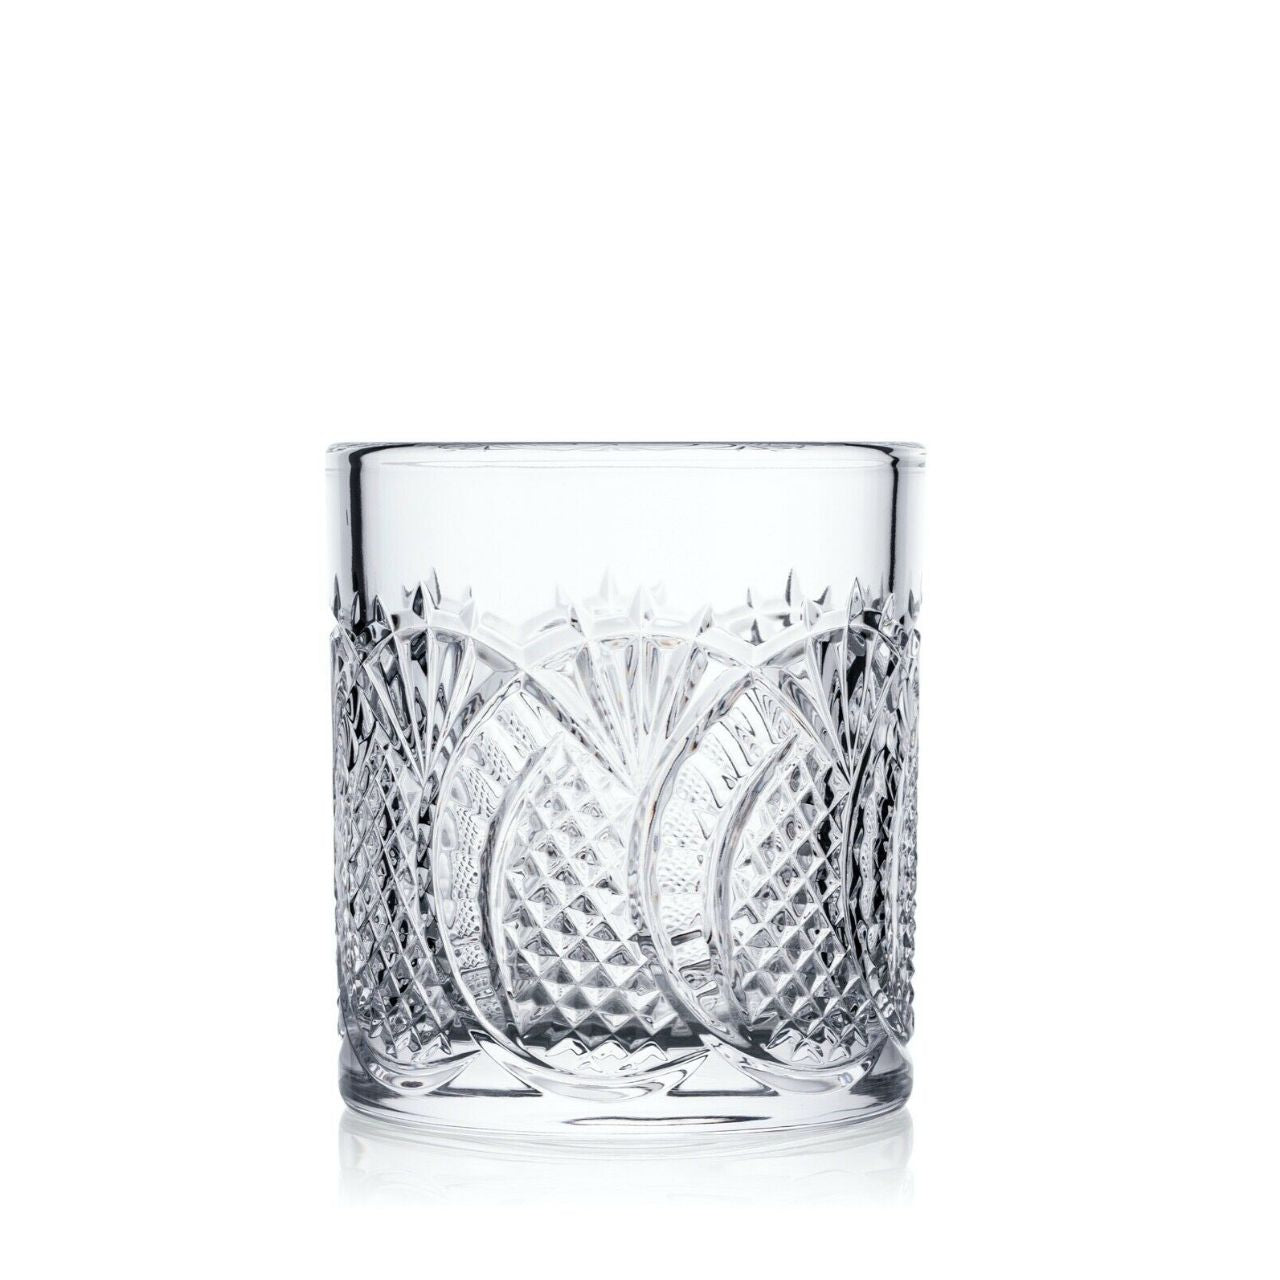 Seahorse Ice Bucket and Scoop by Waterford Crystal  Chill and serve drinks in style with our stunning ice buckets featuring clear cut crystal with unique contemporary patterns, perfect for entertaining.  One of Waterford Crystal's most iconic shapes, the seahorse is not only the symbol of Waterford crystal but the city of Waterford itself.